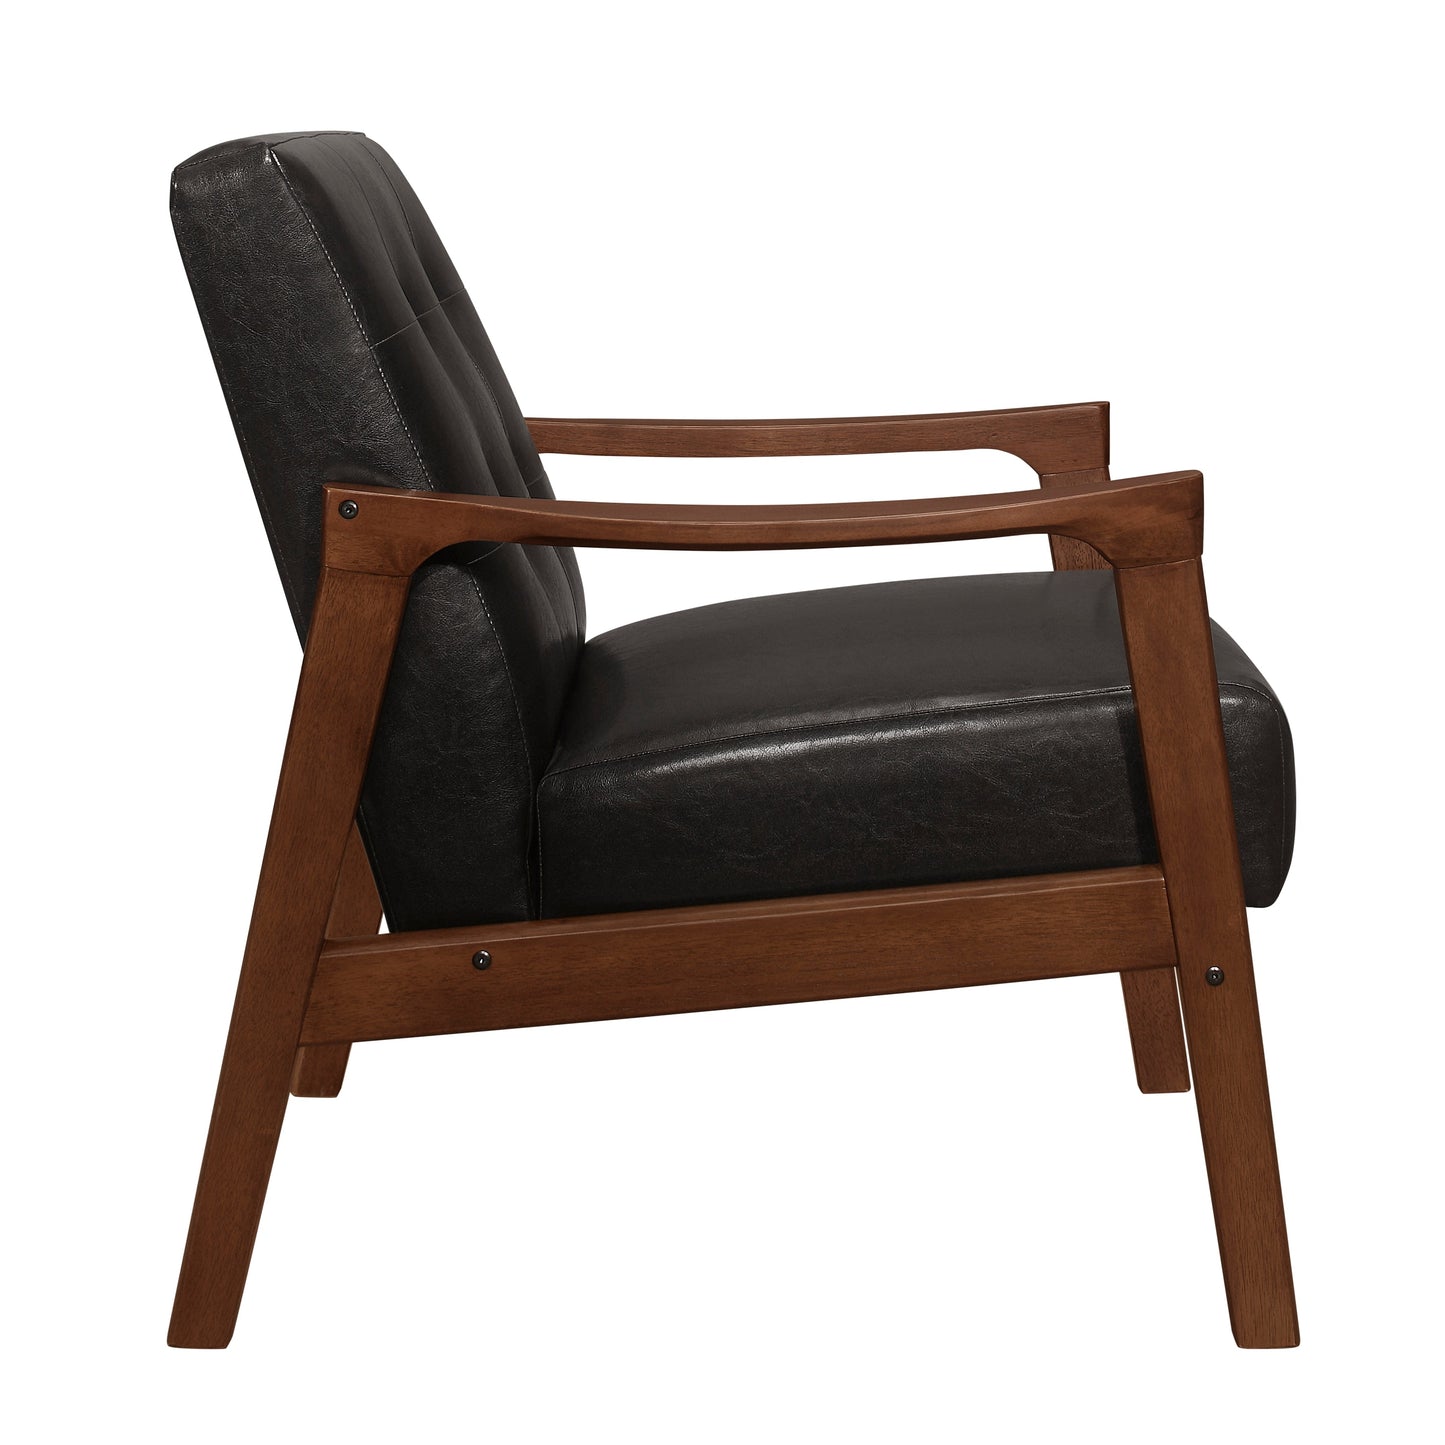 Alby Dark Brown Faux Leather Accent Chair